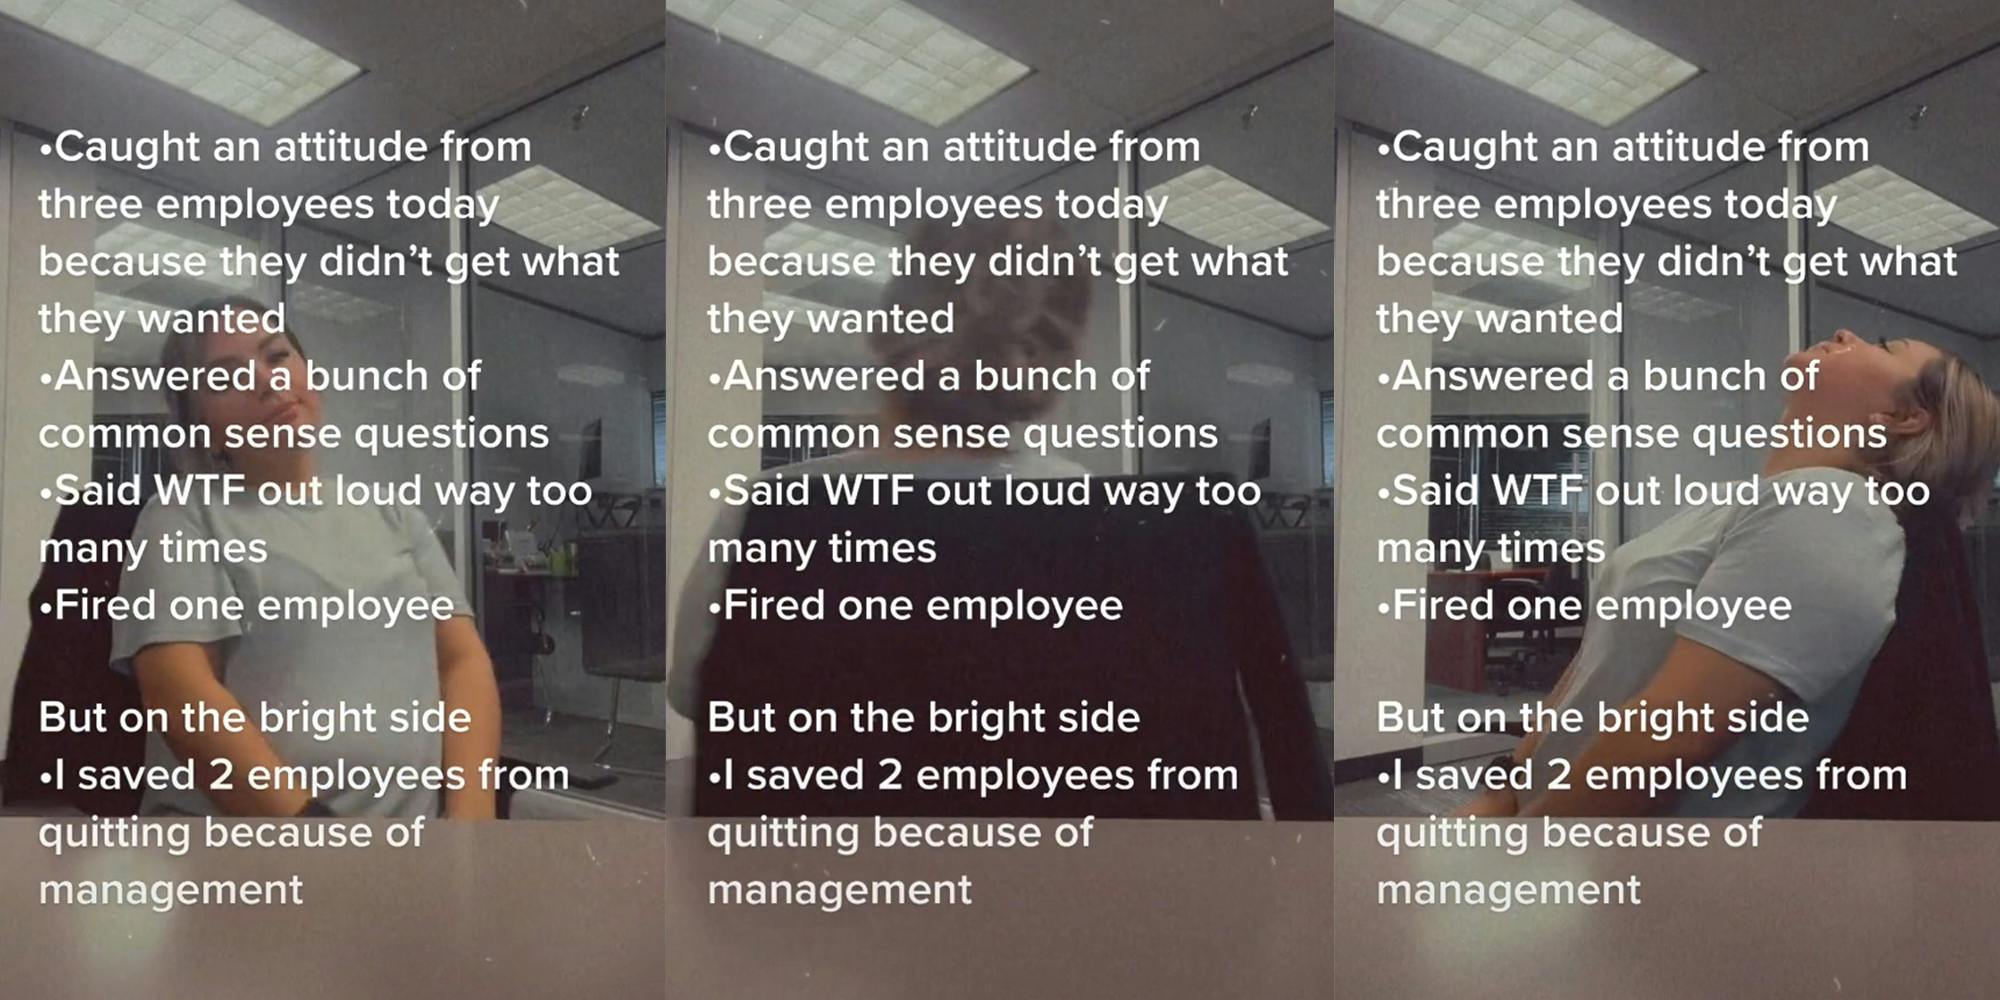 young woman spinning in chair with captions "-caught an attitude from three employees today because they didn't get what they wanted -answered a bunch of common sense questions -said WTF out loud way too many times -Fired one employee But on the bright side -I saved 2 employees from quitting because of management"